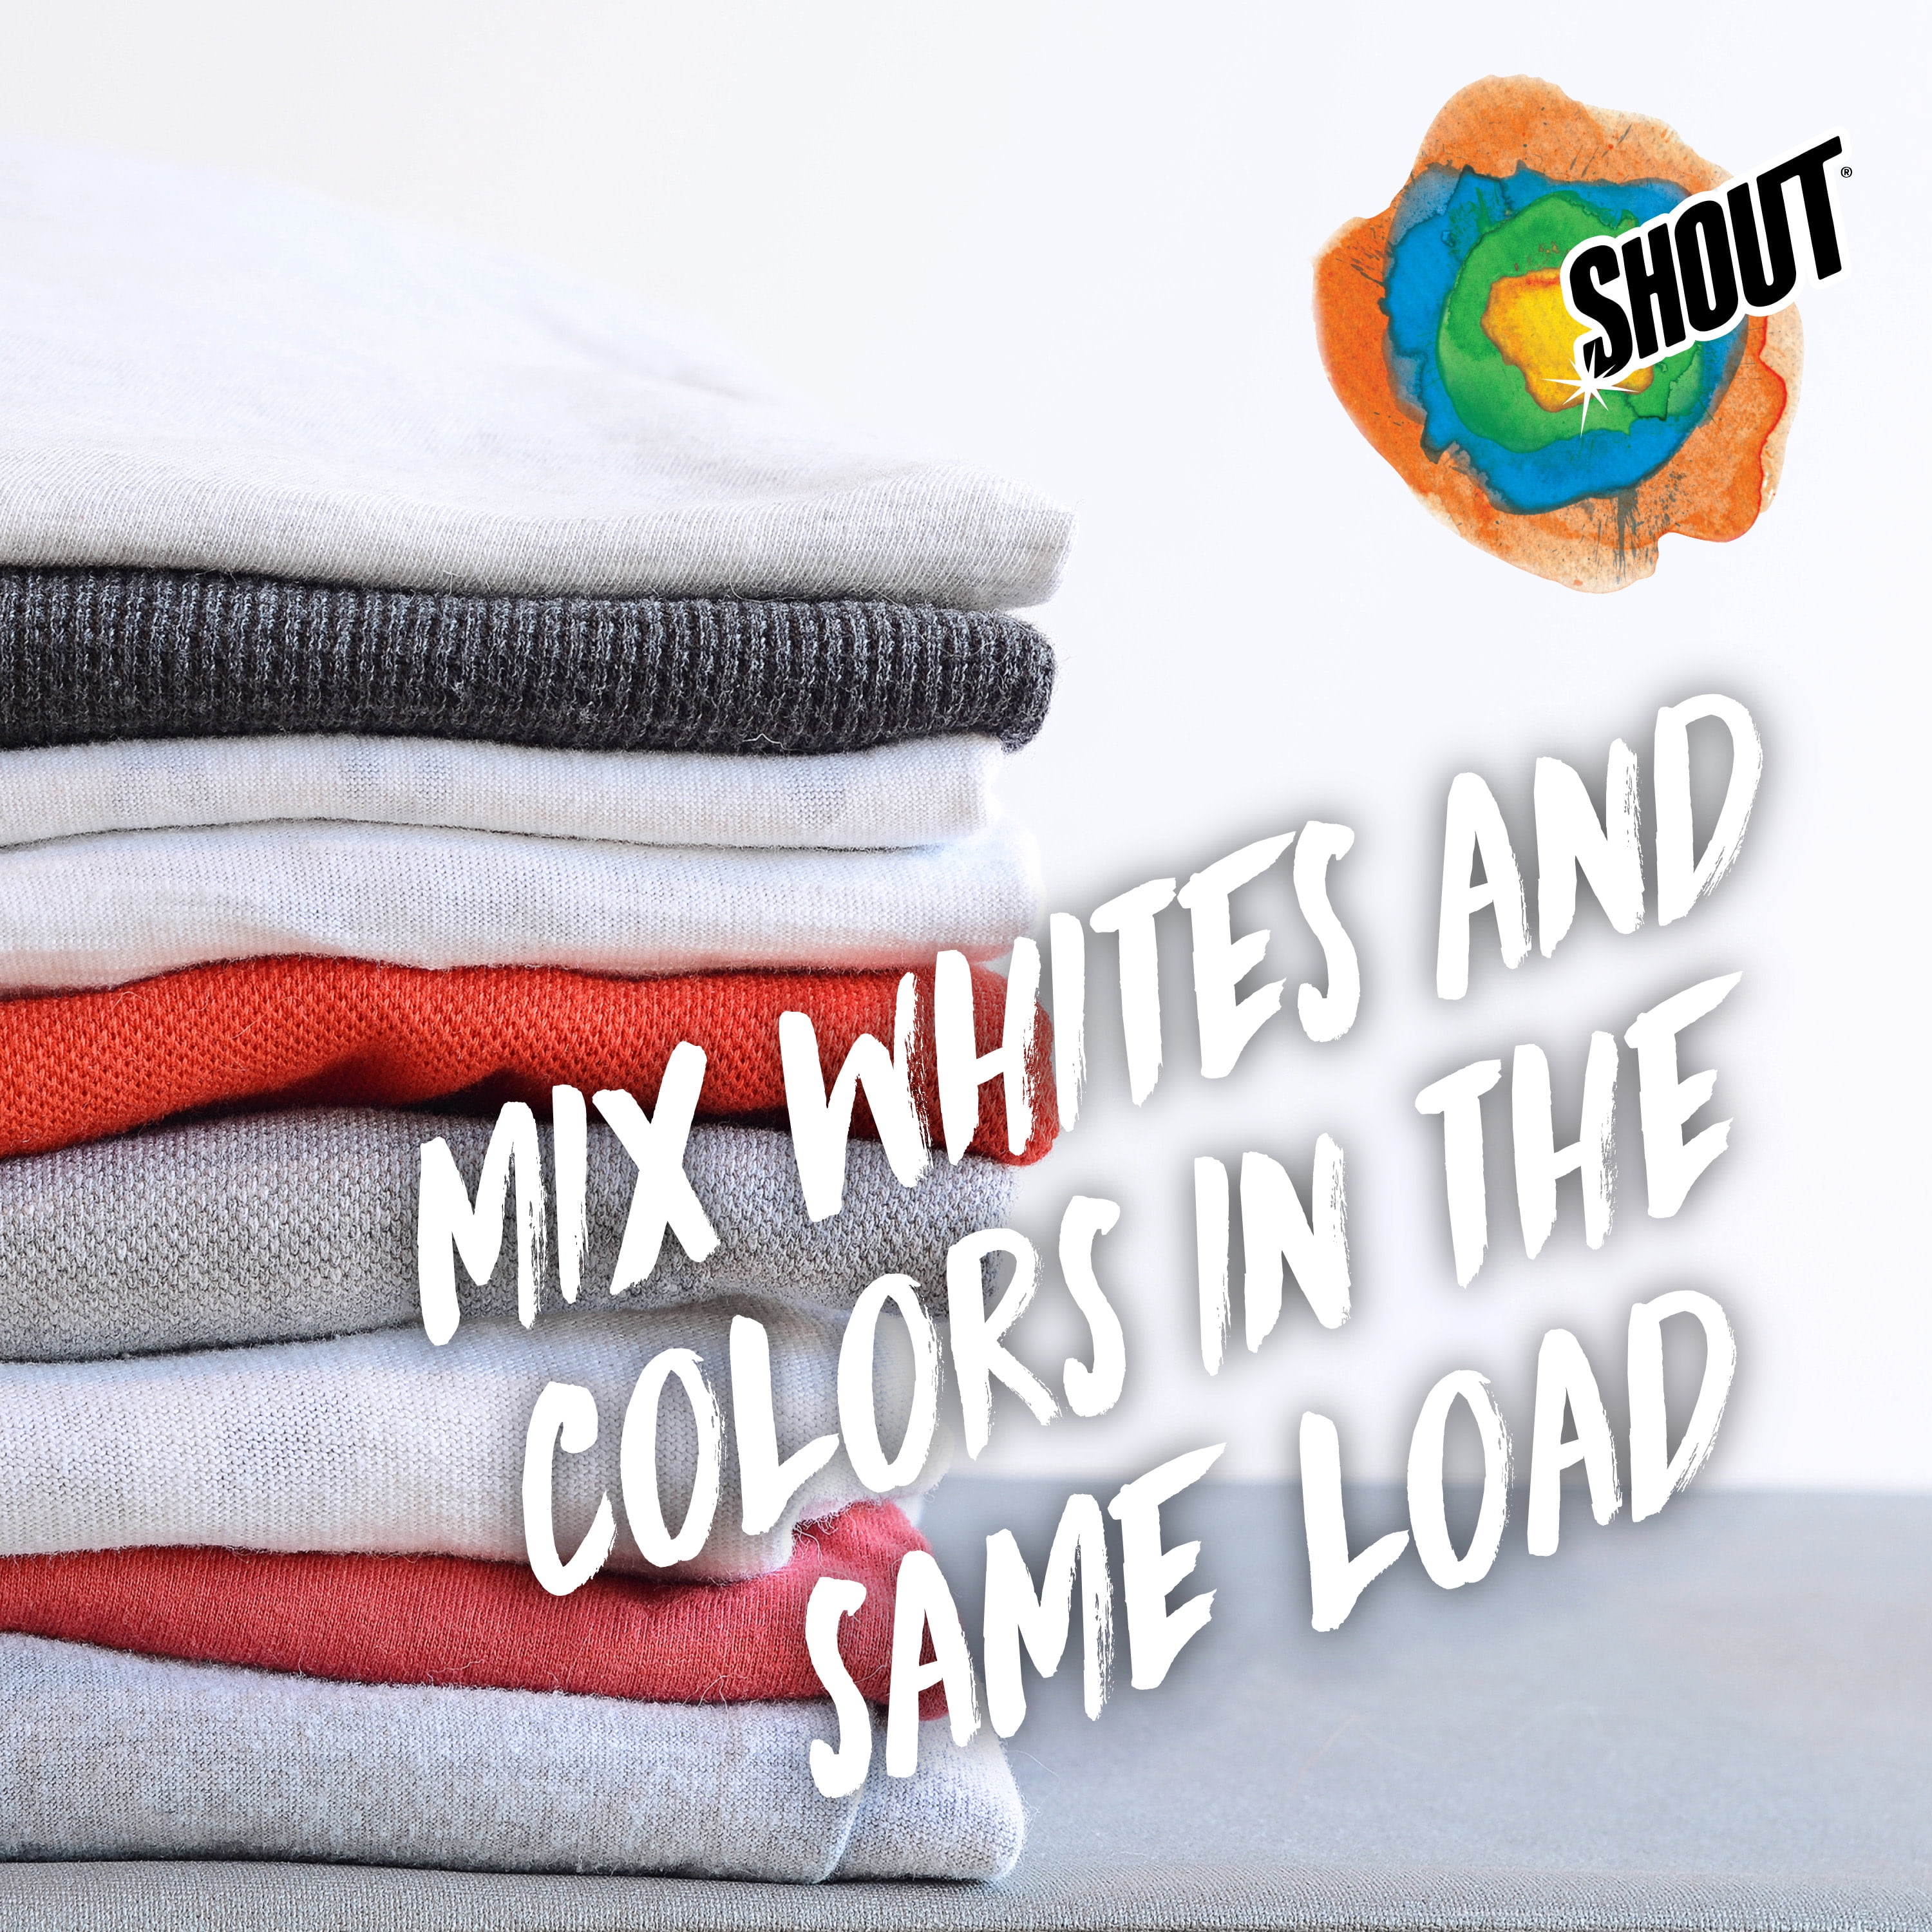 Shout Color Catcher Sheets for Laundry, Maintains Clothes Original Colors,  24 Count - Pack of 12 (288 Total Sheets)